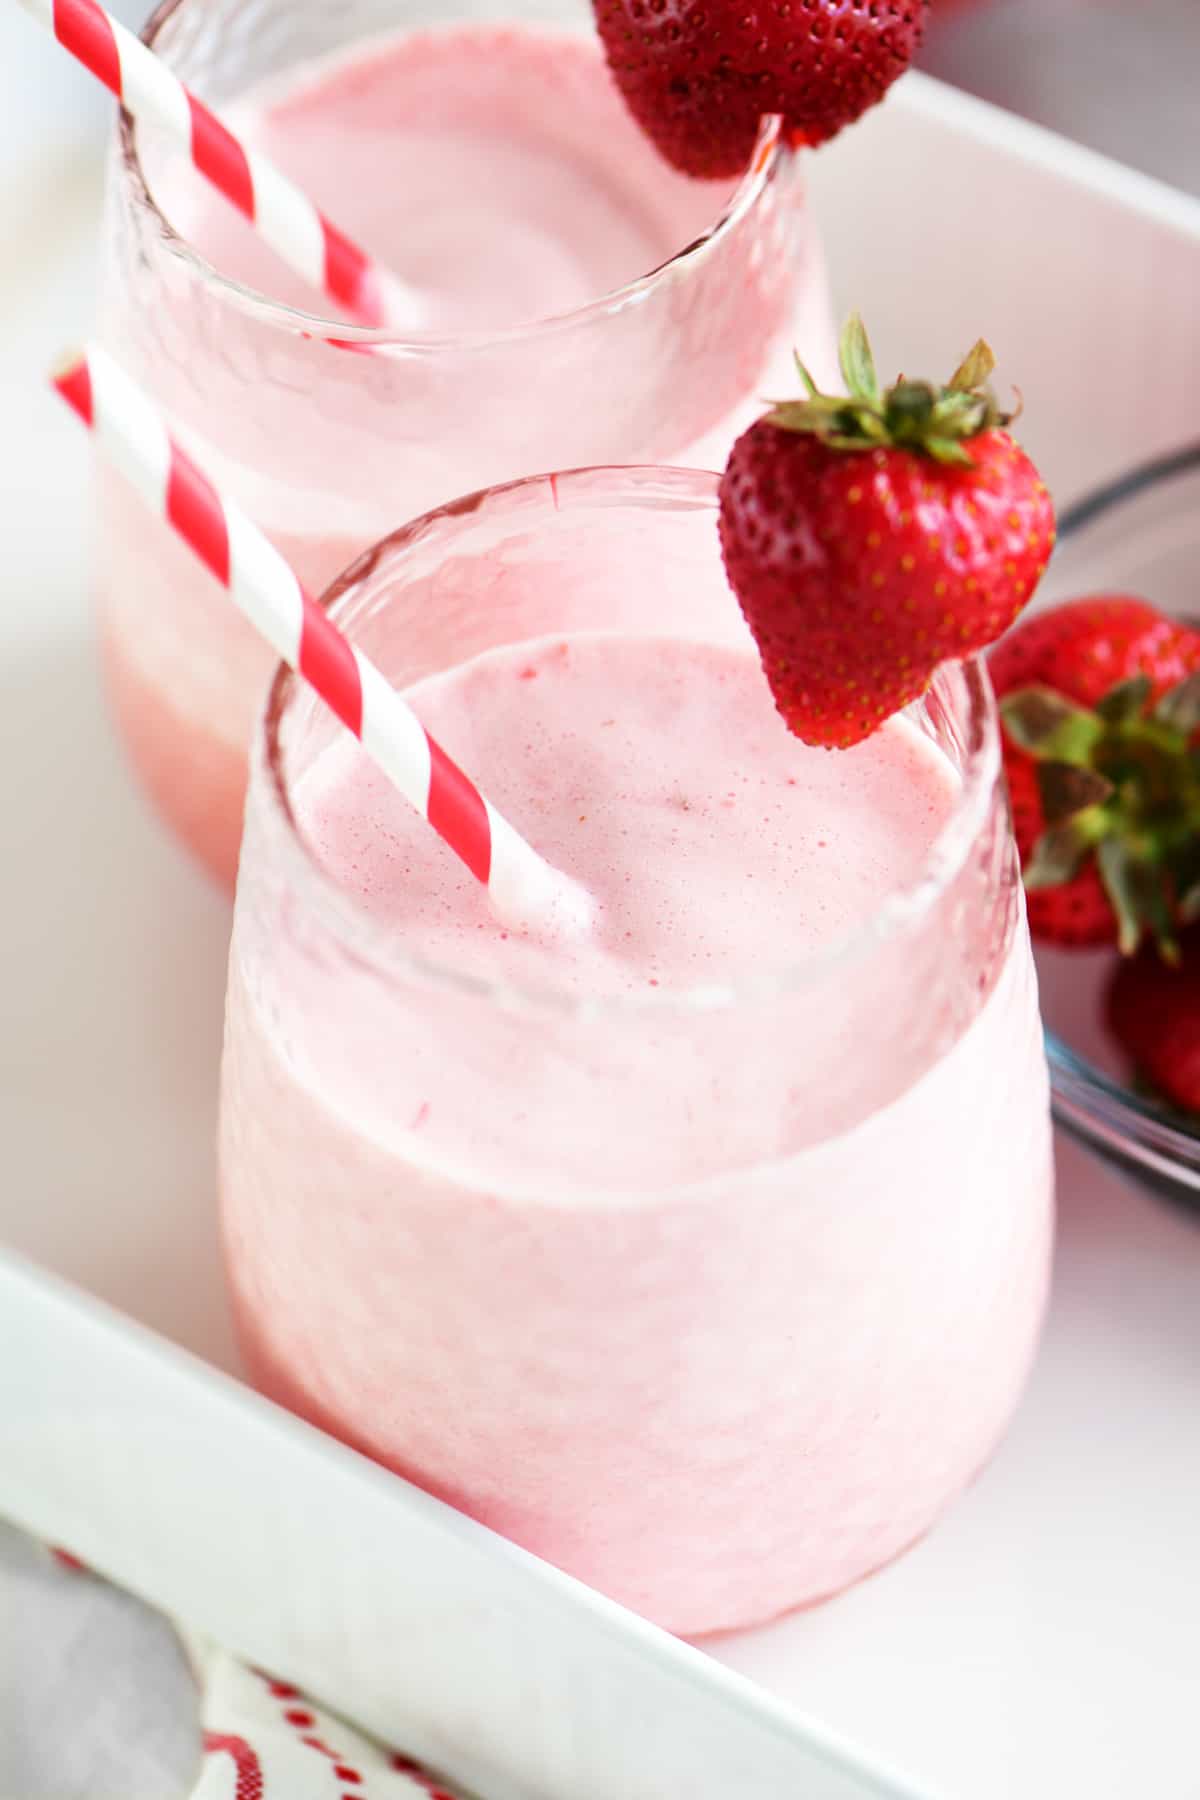 two glasses of strawberry whip with a strawberry garnish and striped straw